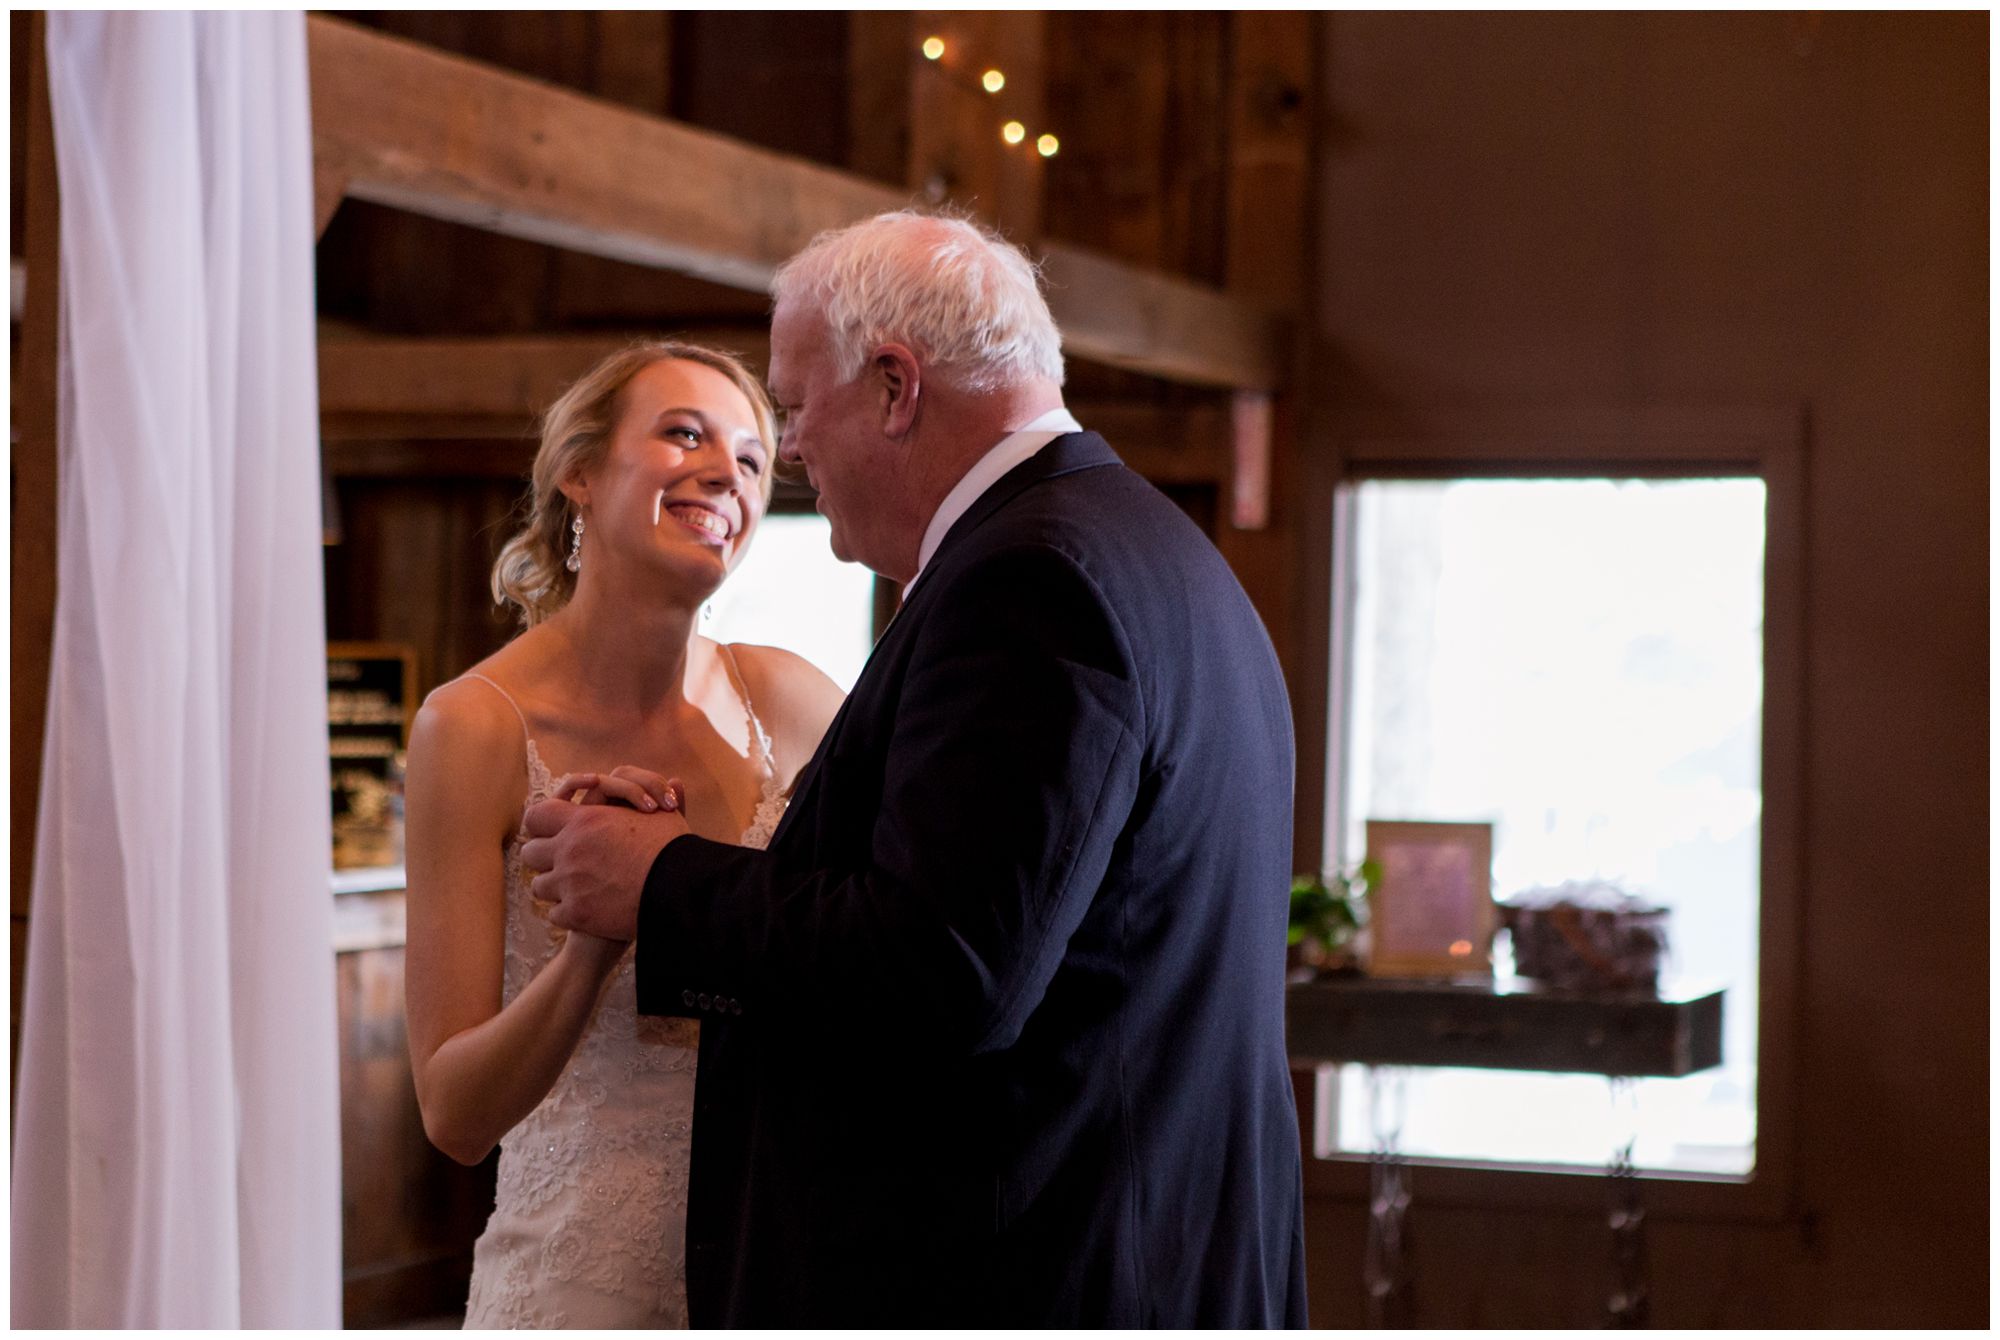 bride and father dance during wedding reception at Mustard Seed Gardens in Noblesville Indiana